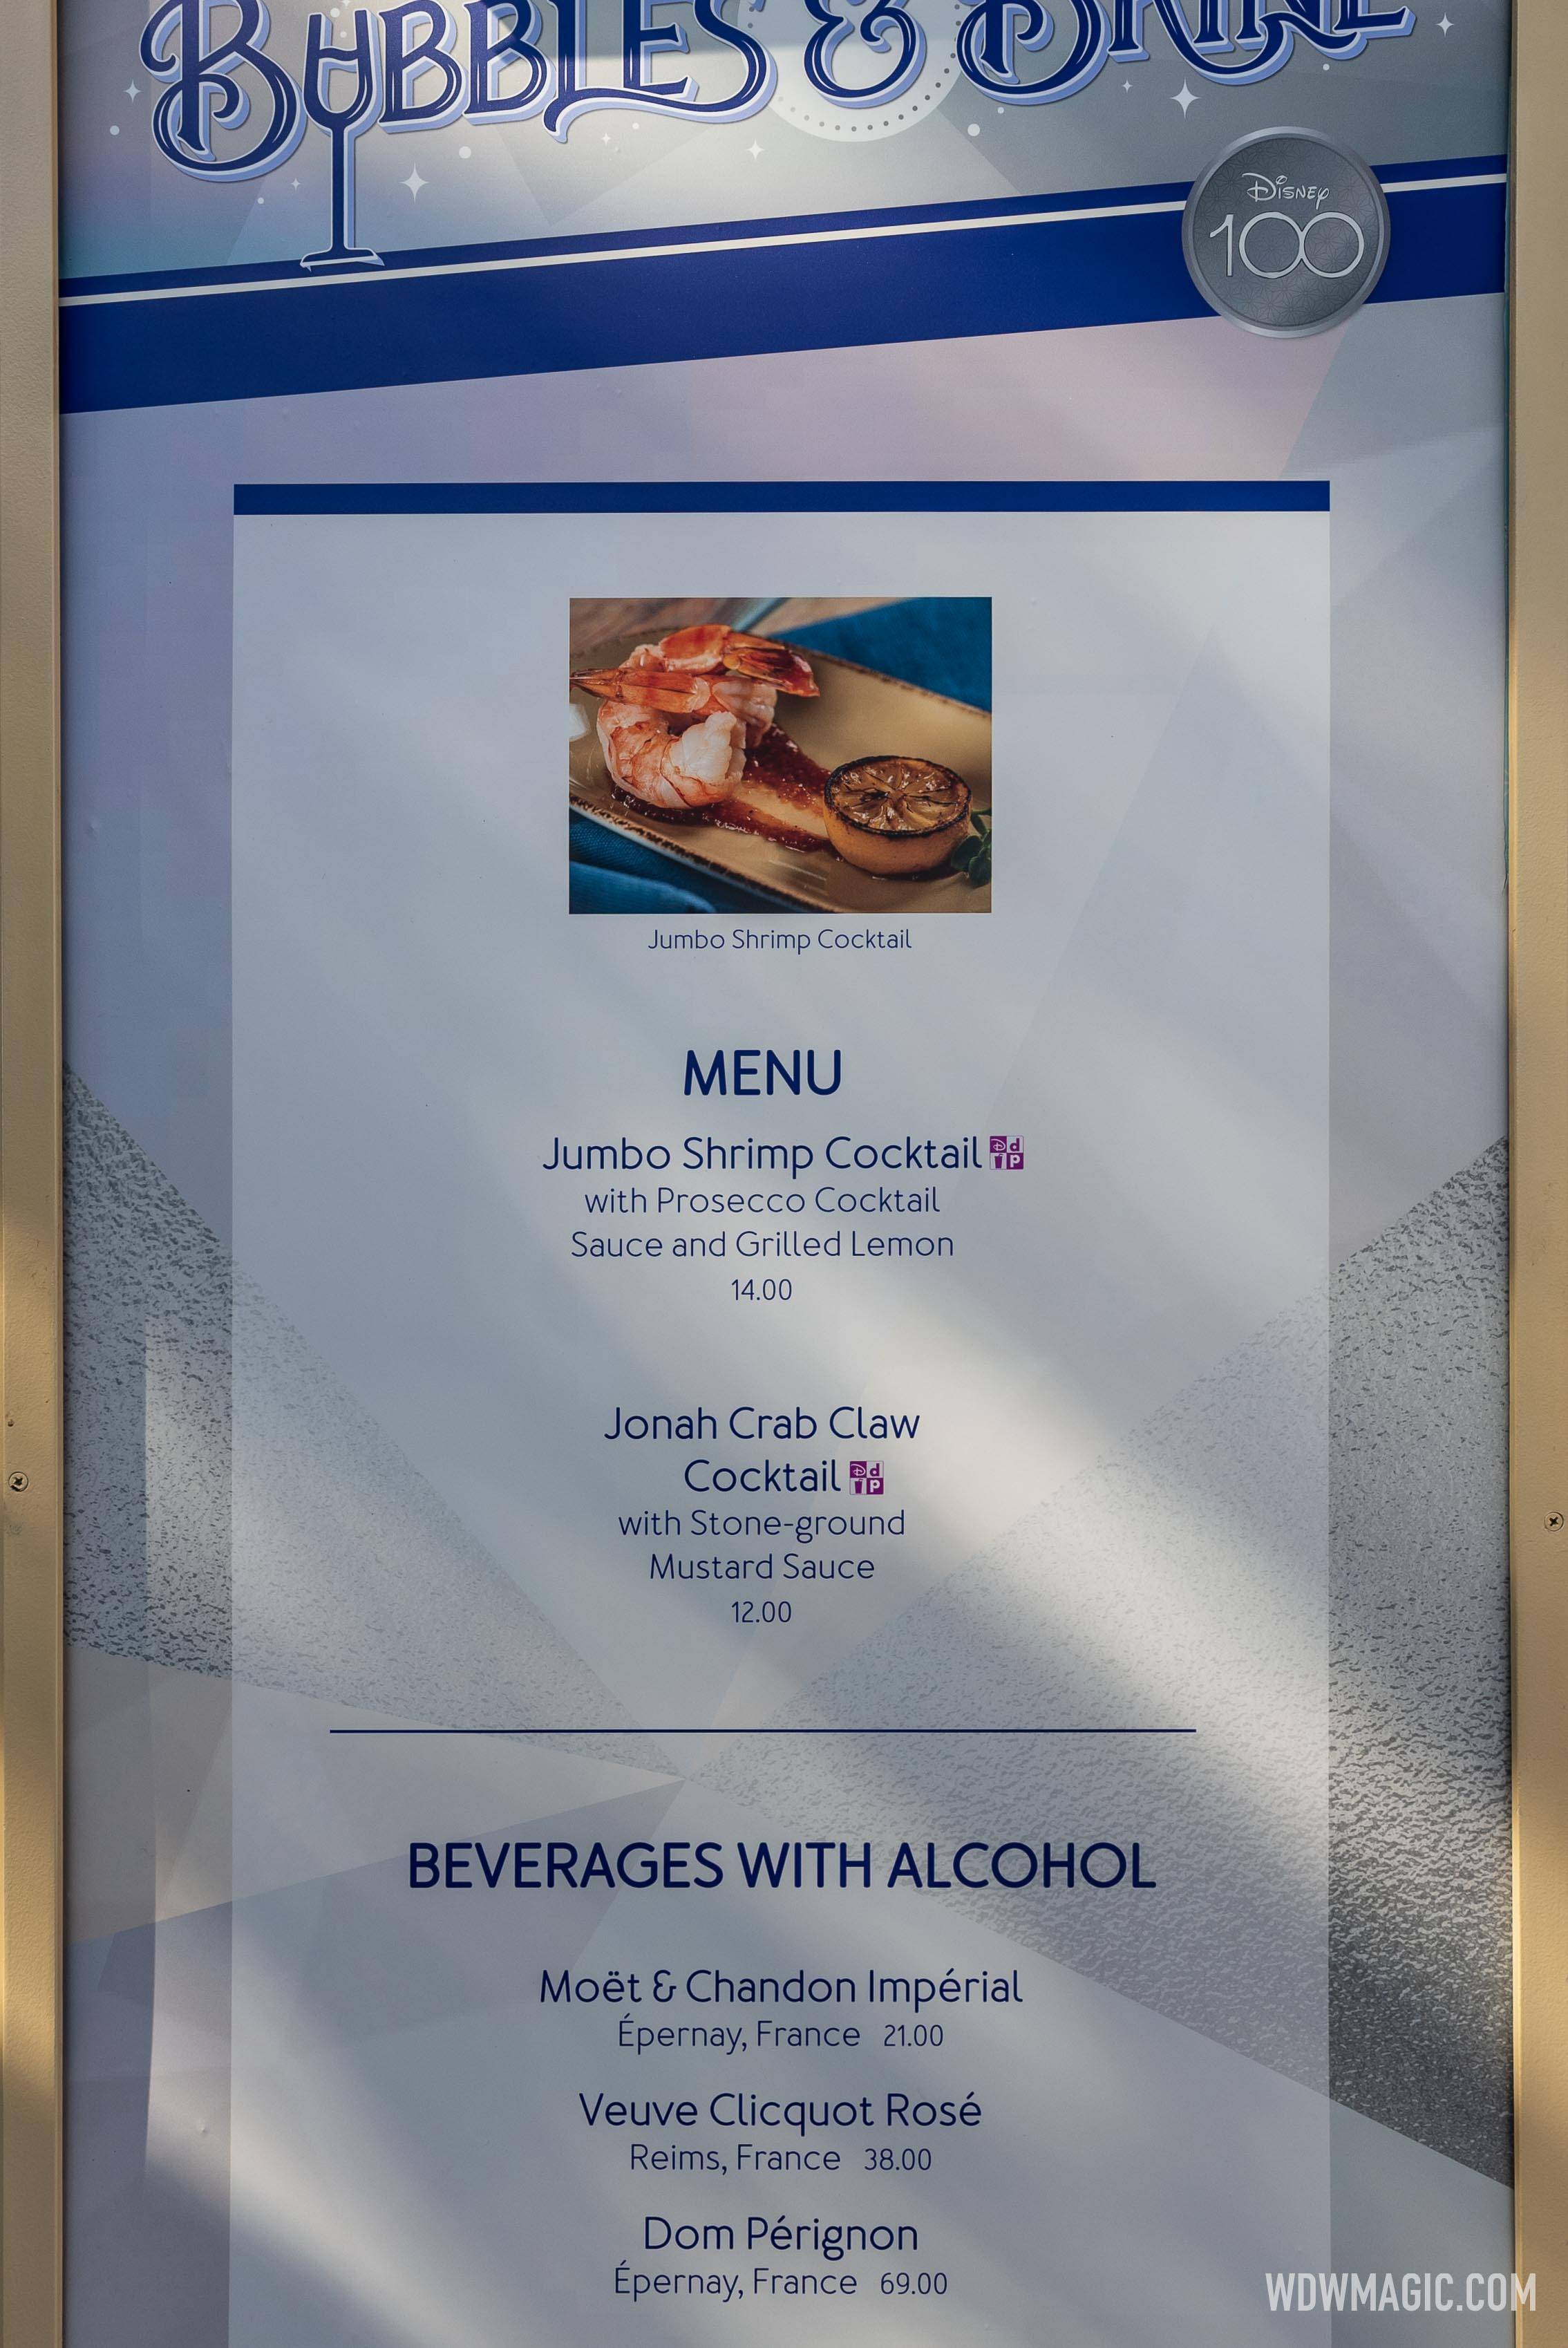 New Disney100 kiosks add more flavor to the EPCOT International Food and Wine Festival